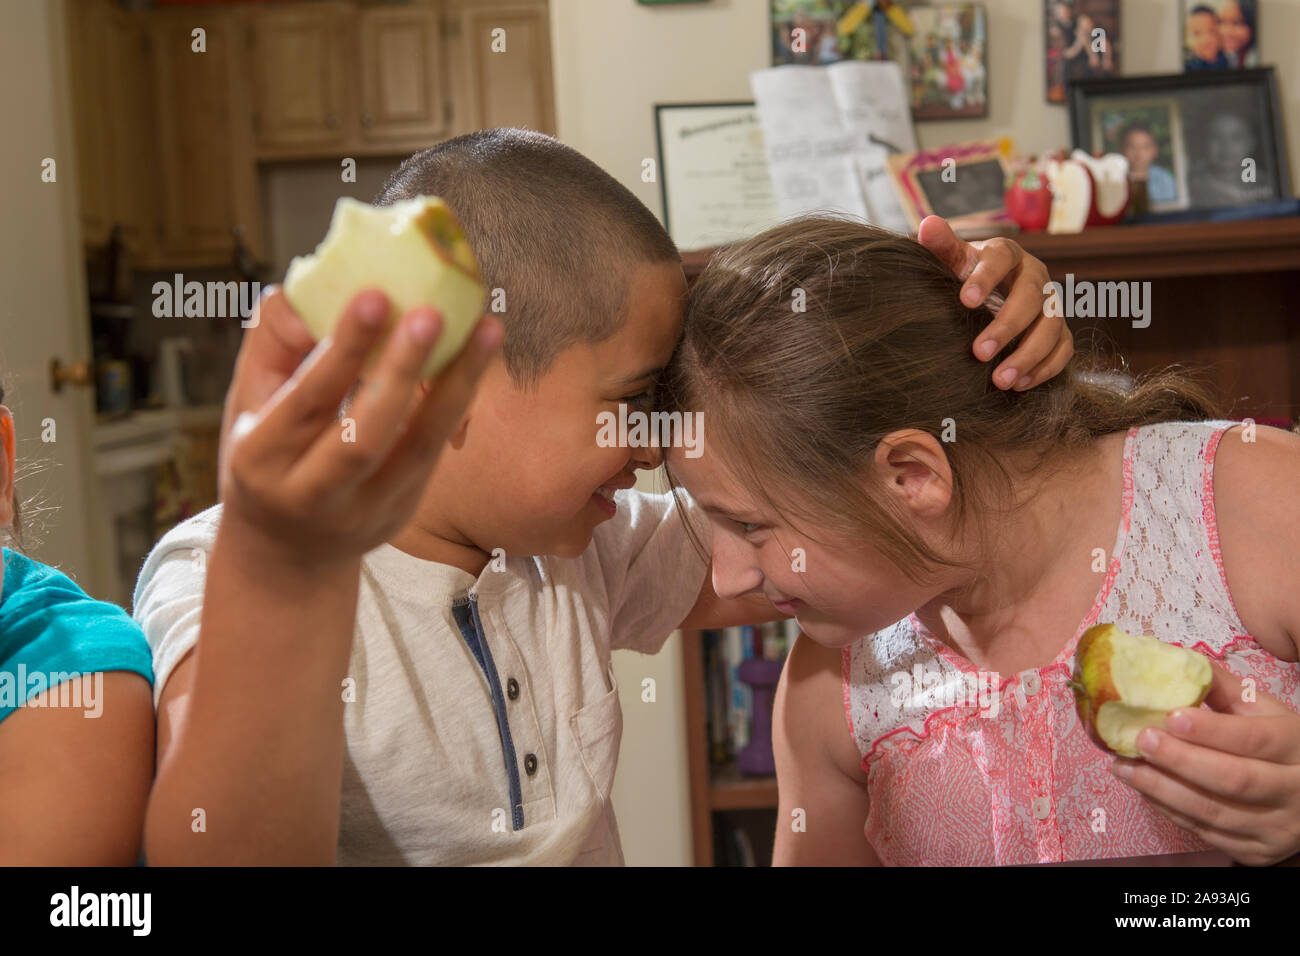 Hispanic boy with Autism playing with his sister at home Stock Photo